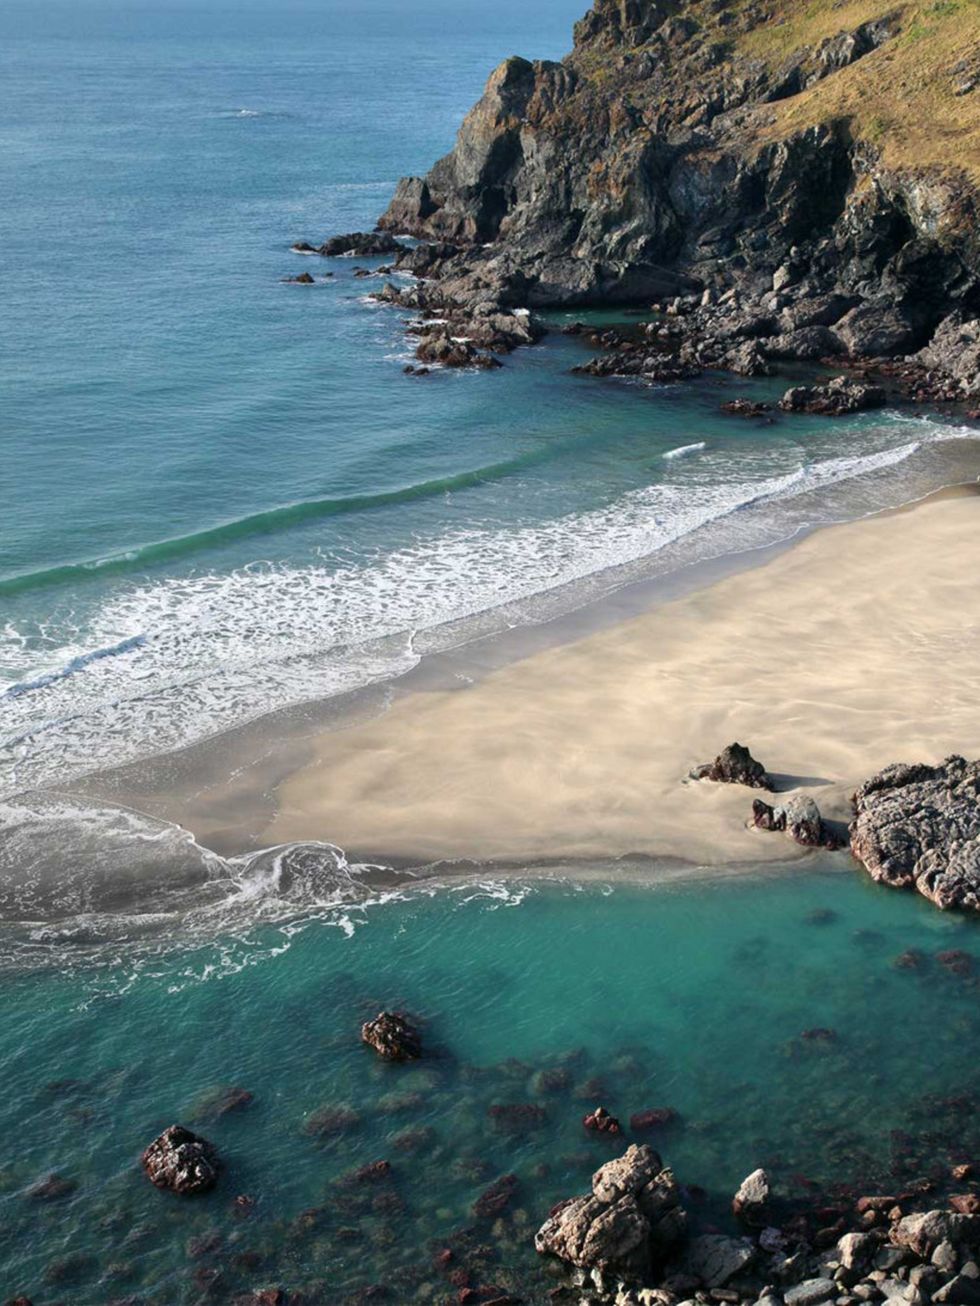 <p>CORNWALL</p><p>When the sun shines there is nothing greater that a British seaside holiday.</p><p>And when it doesn't? Well, you just need to be prepared. </p><p><em><a href="http://www.elleuk.com/travel/holiday-inspiration/five-of-the-best-dog-friendl